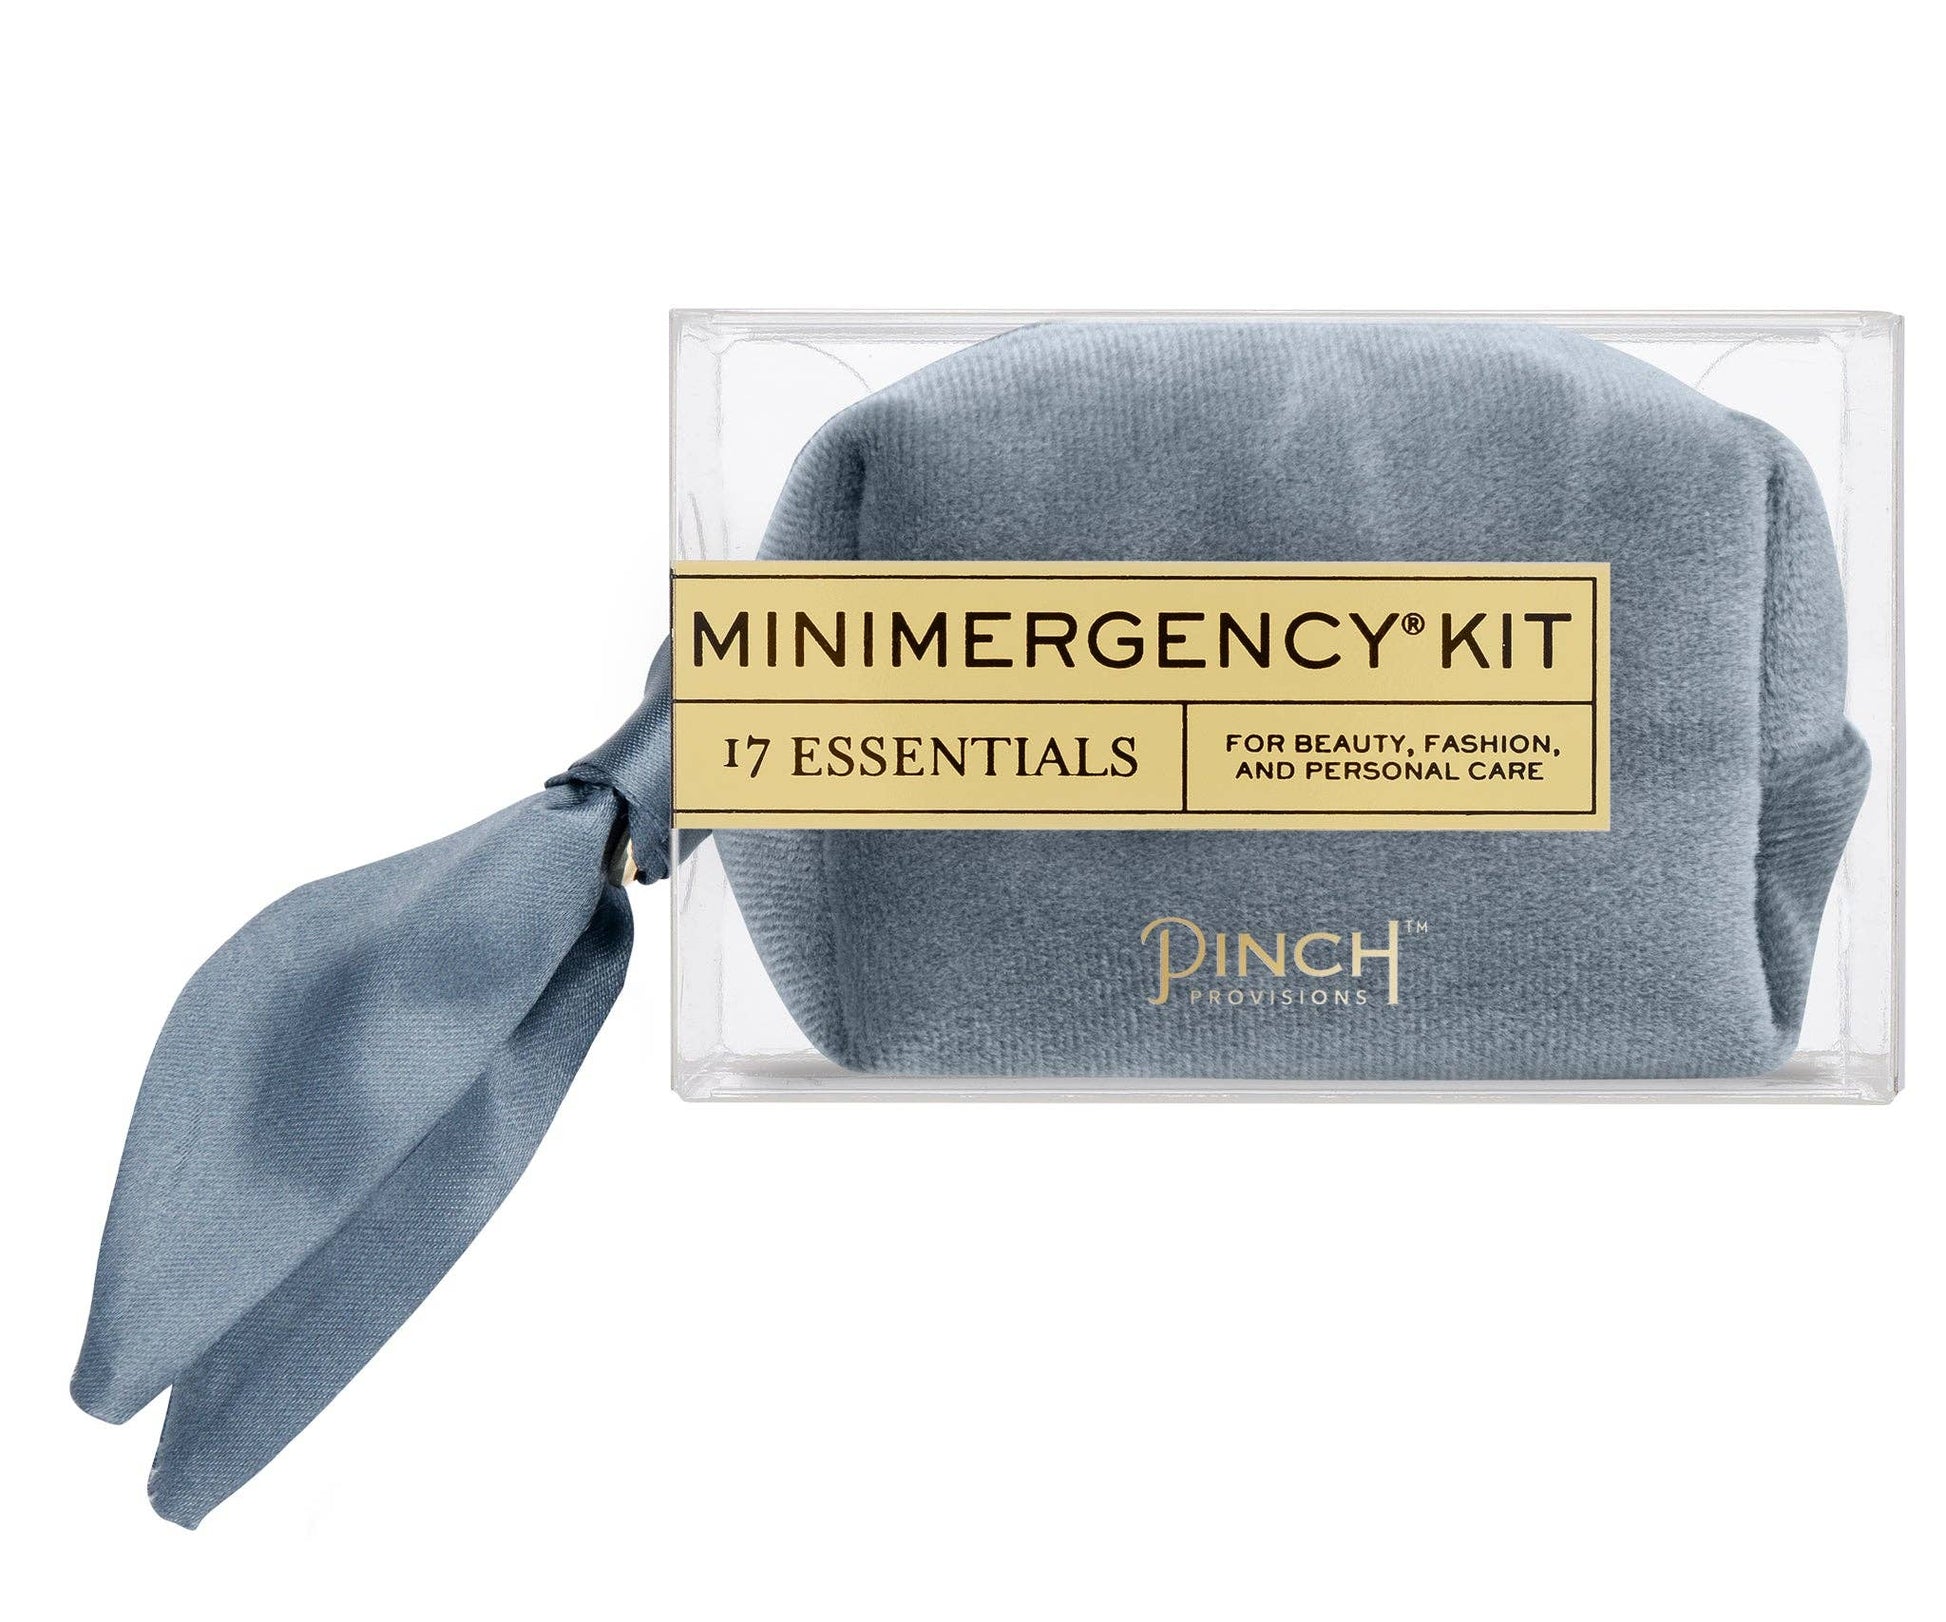 PINCH PROVISIONS MINIMERGENCY KIT FOR HER 17 GOLD BEAUTY PERSONAL ESSENTIALS